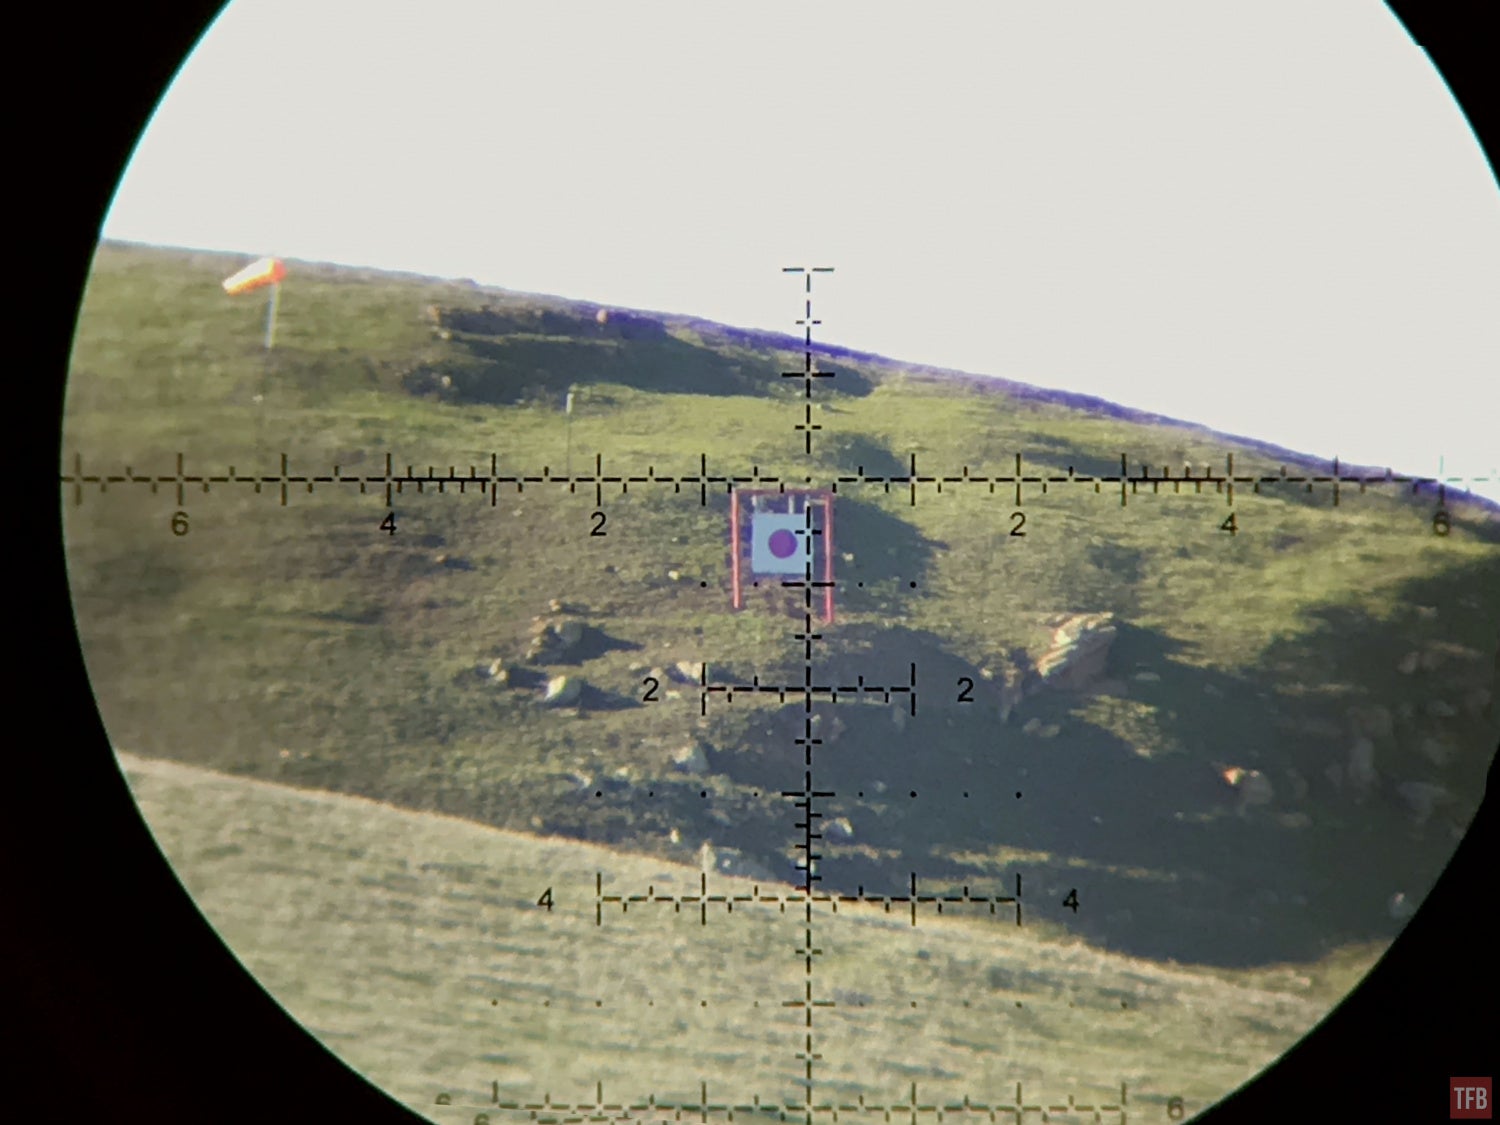 PR2 reticle looking at a mile target